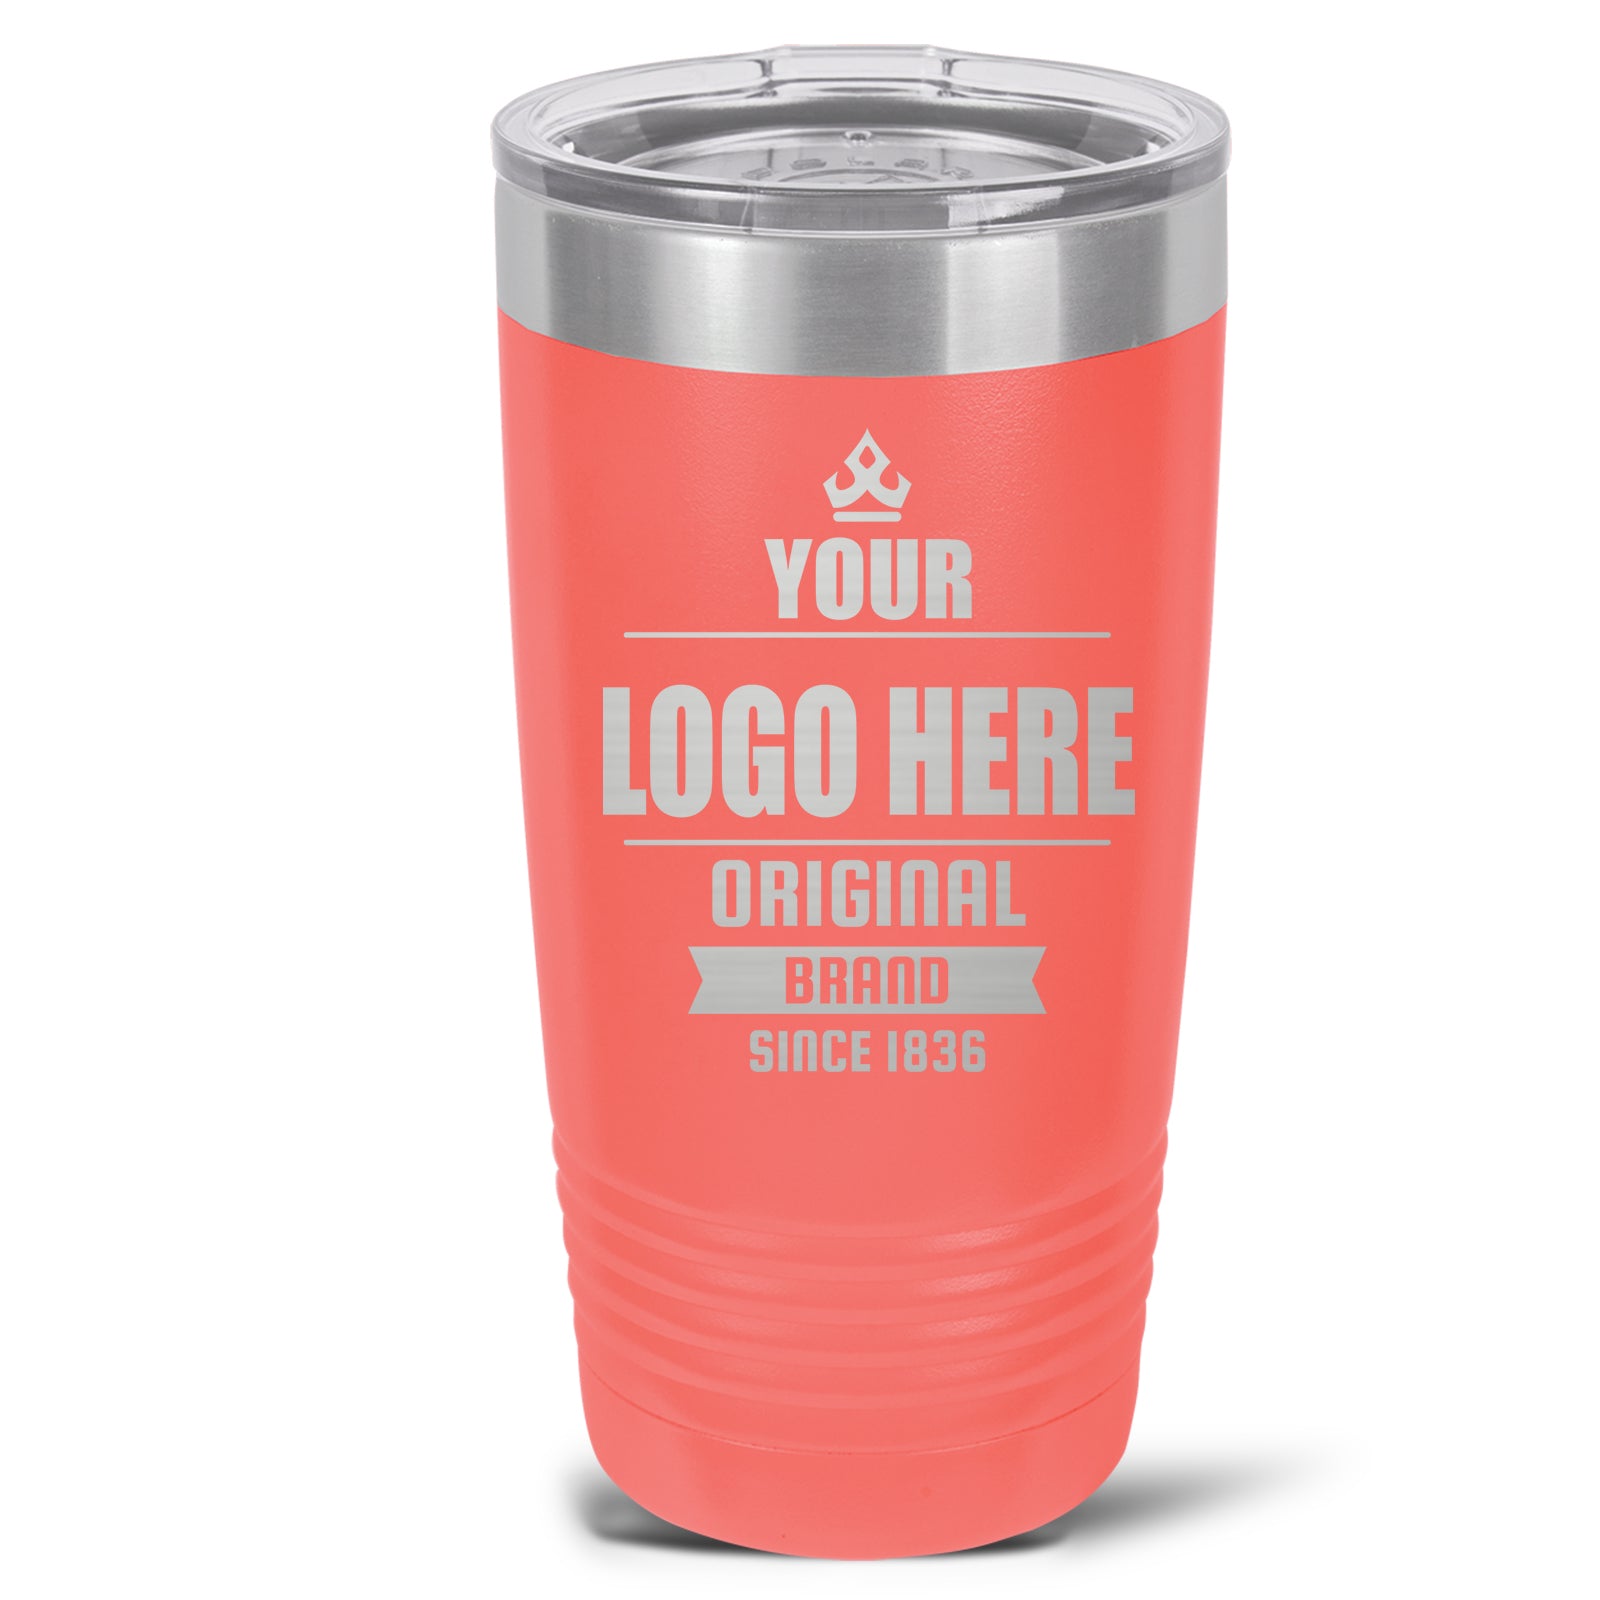 FROST Stainless Steel 20 oz Tumbler - Sig Sauer logo